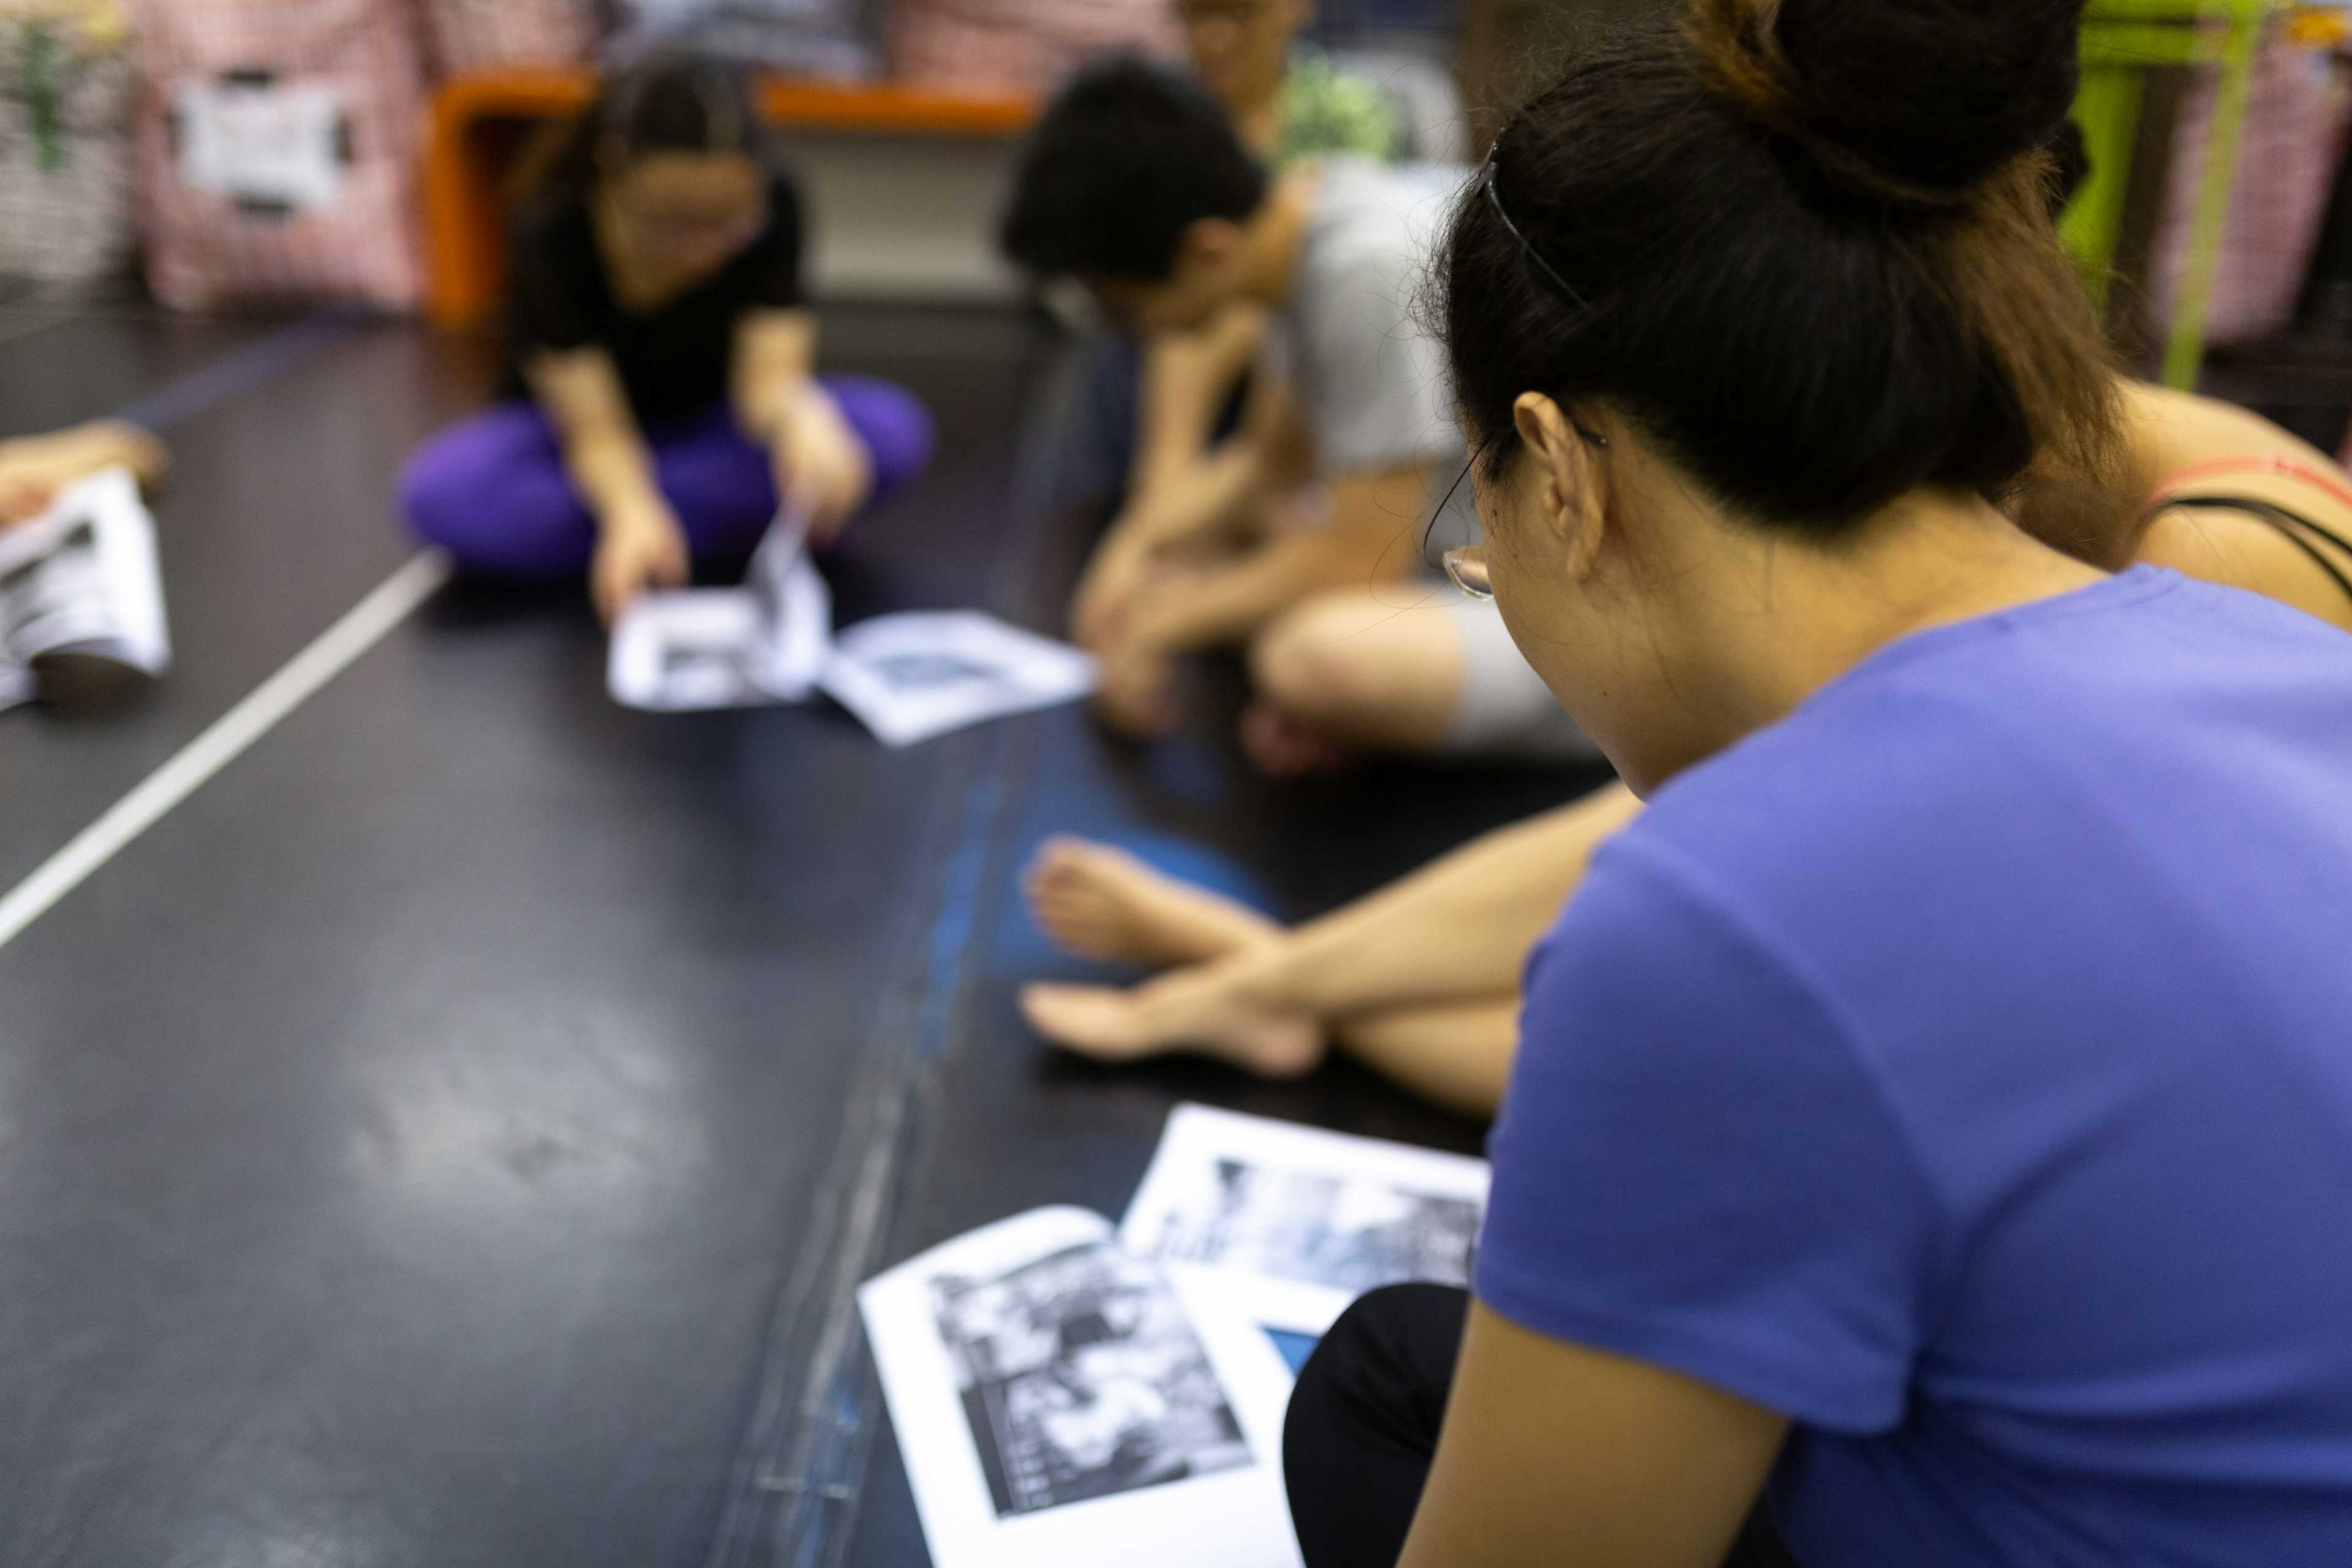 Rooftop Productions • Hong Kong School Drama Courses | Michelle sitting on the floor going over a document with participants in a drama course | Rooftop Productions • Hong Kong Theatre Company